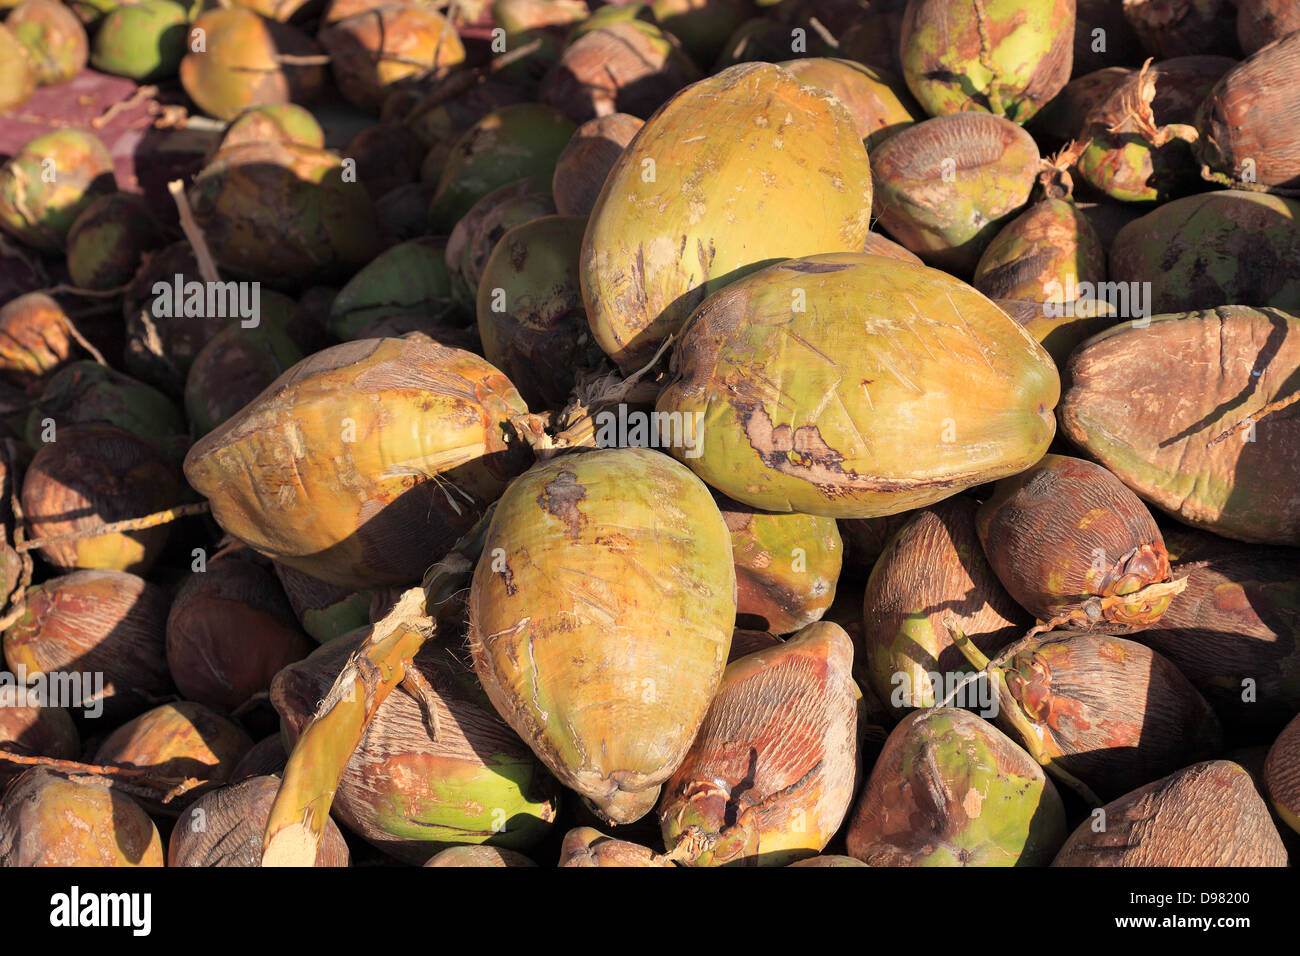 Coconuts in a market stall in Oman Stock Photo